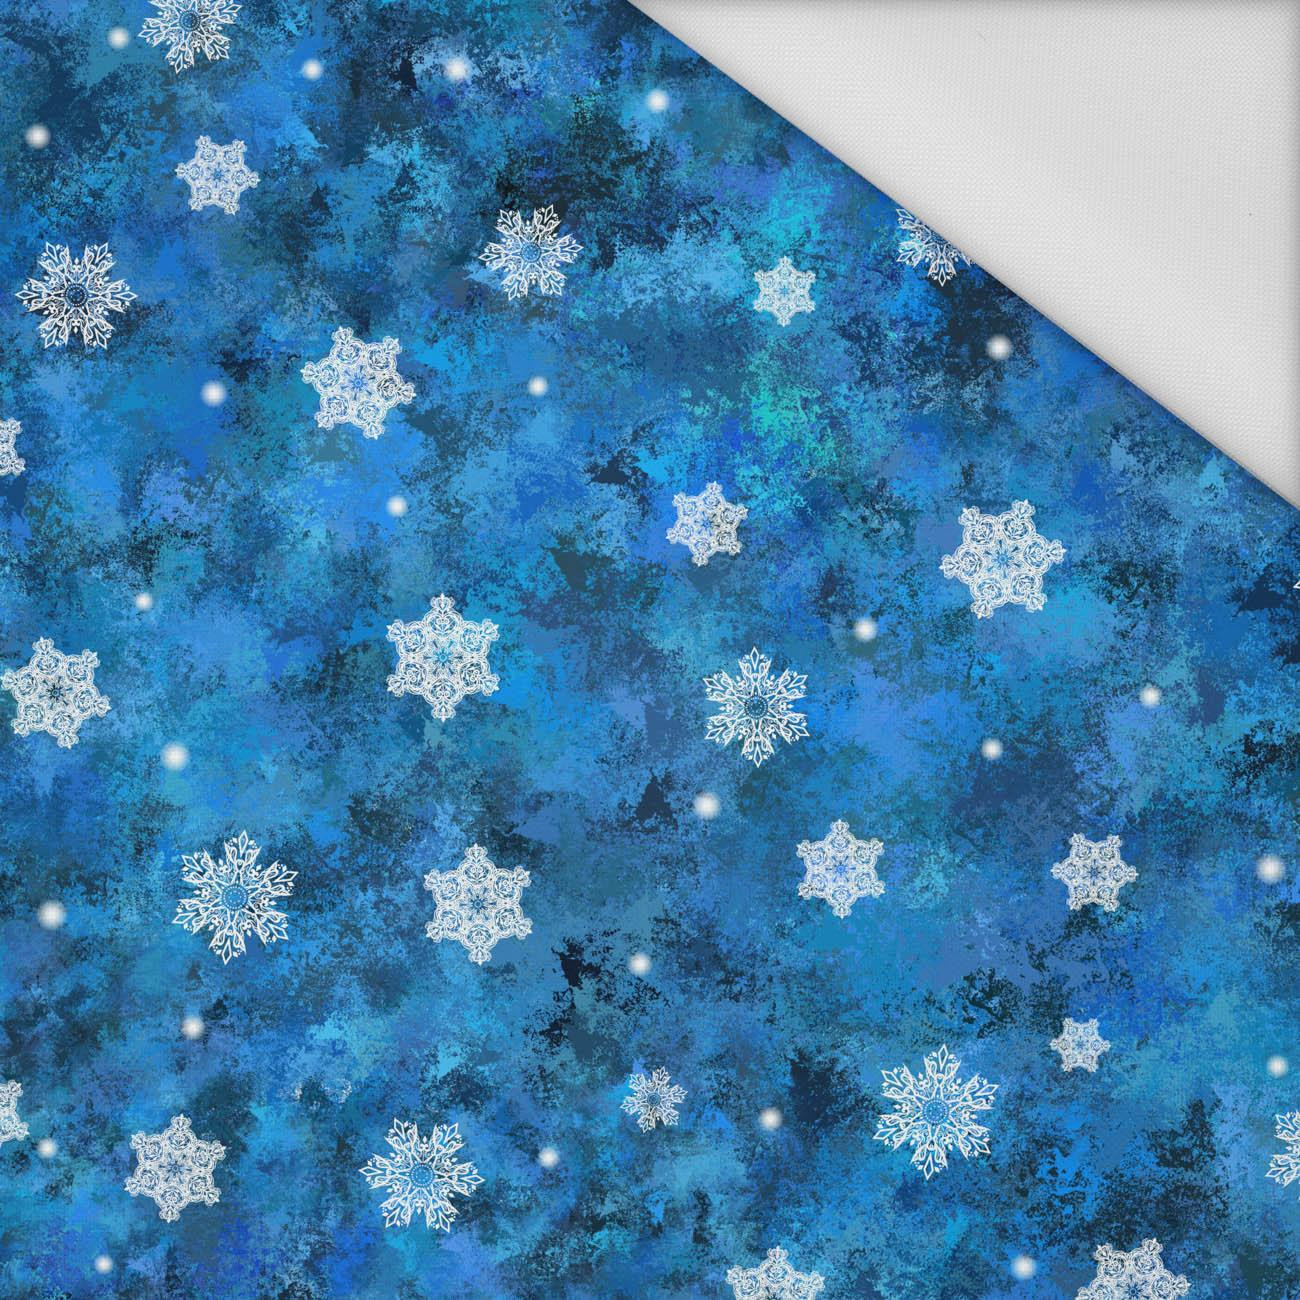 SNOWFLAKES PAT. 3 (WINTER IS COMING) - Waterproof woven fabric